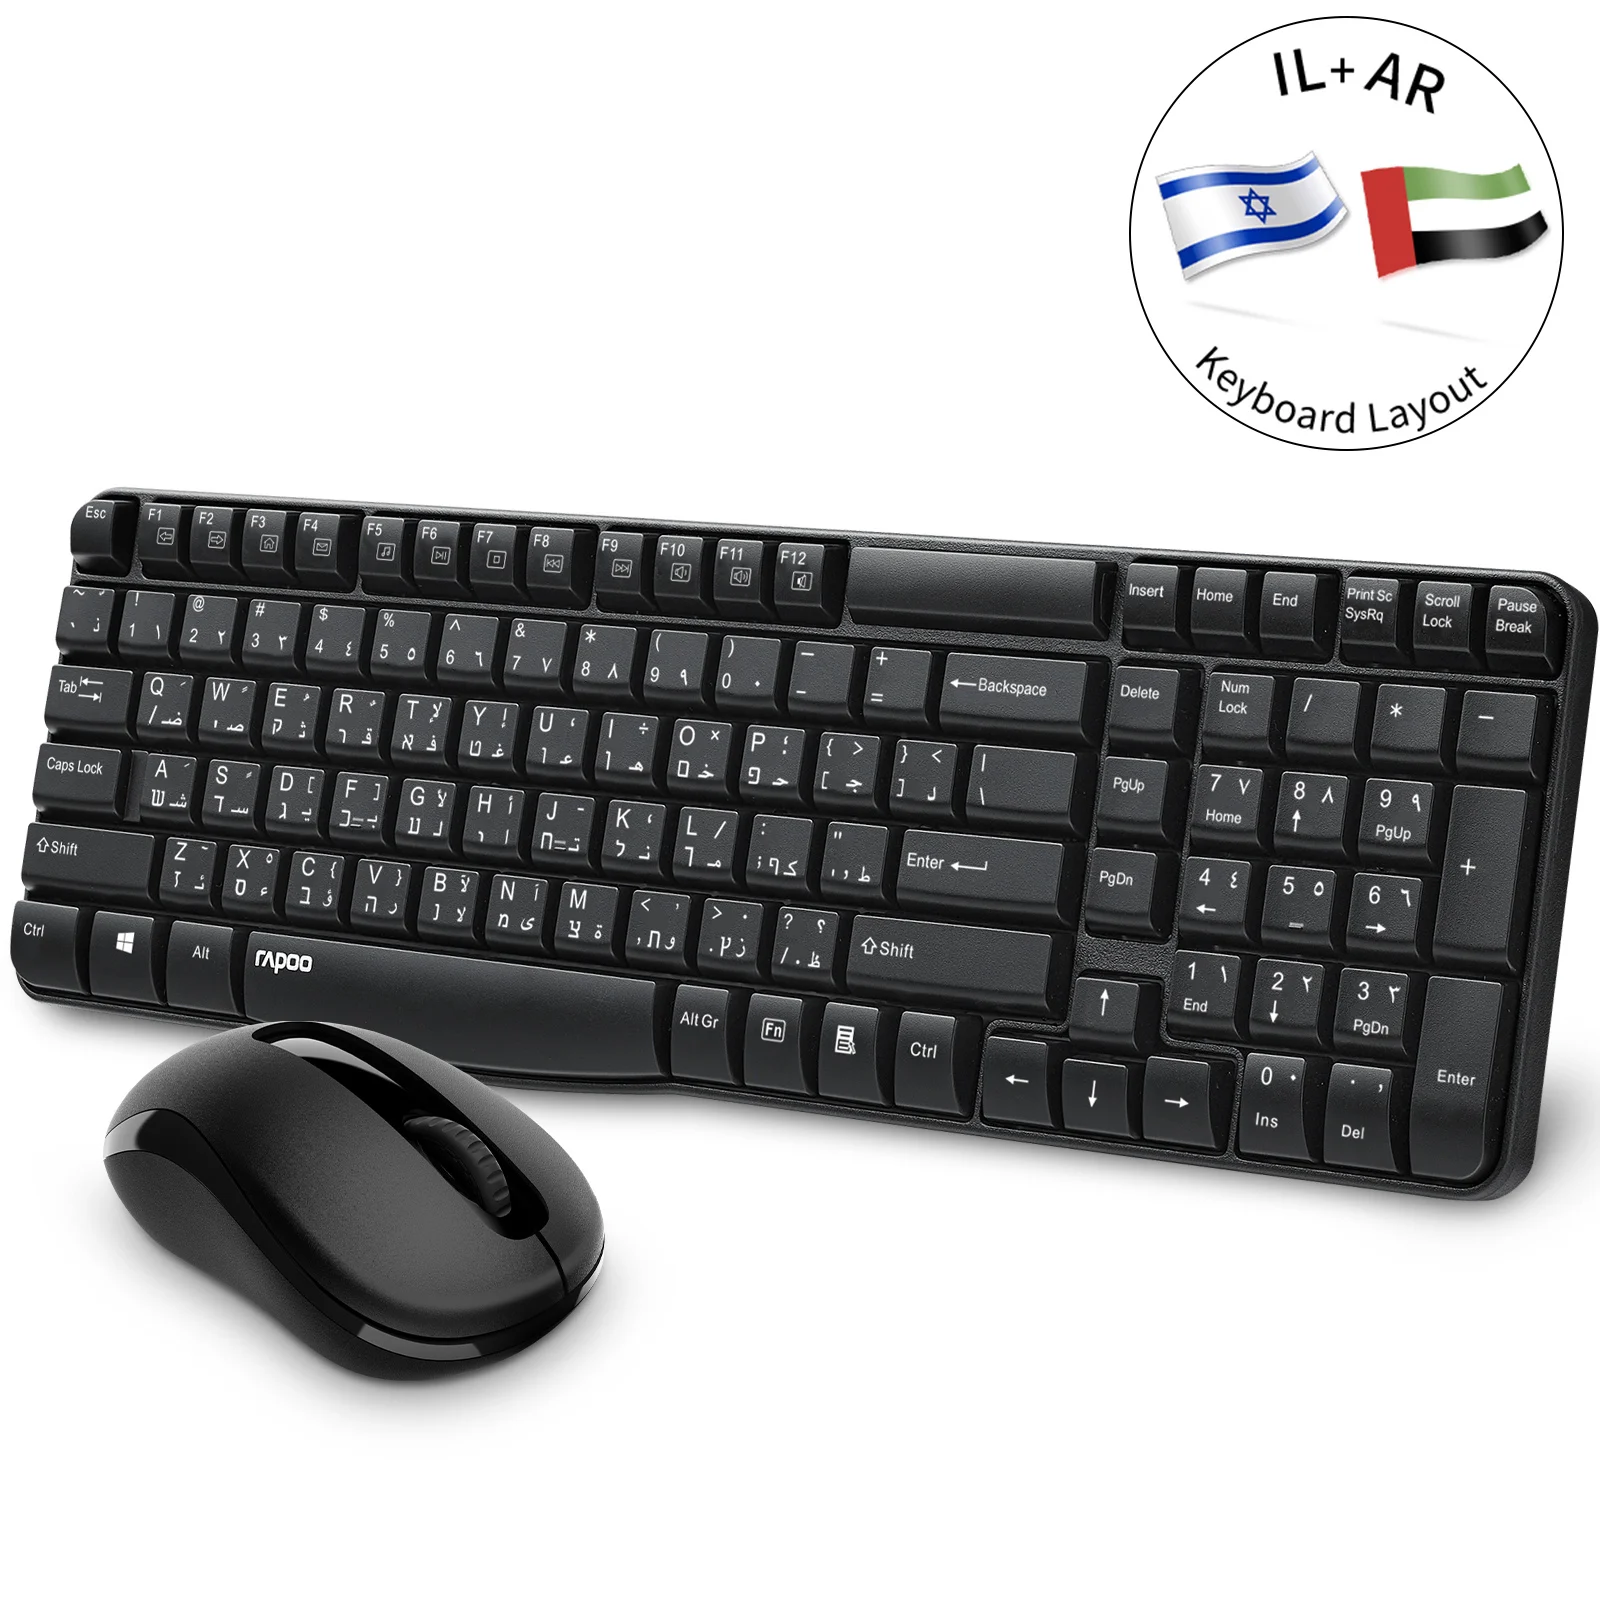 

Rapoo X1800S Wireless Optical Mouse and Keyboard Combo For PC Laptop Desktop Tablet Hebrew/Arabic Language